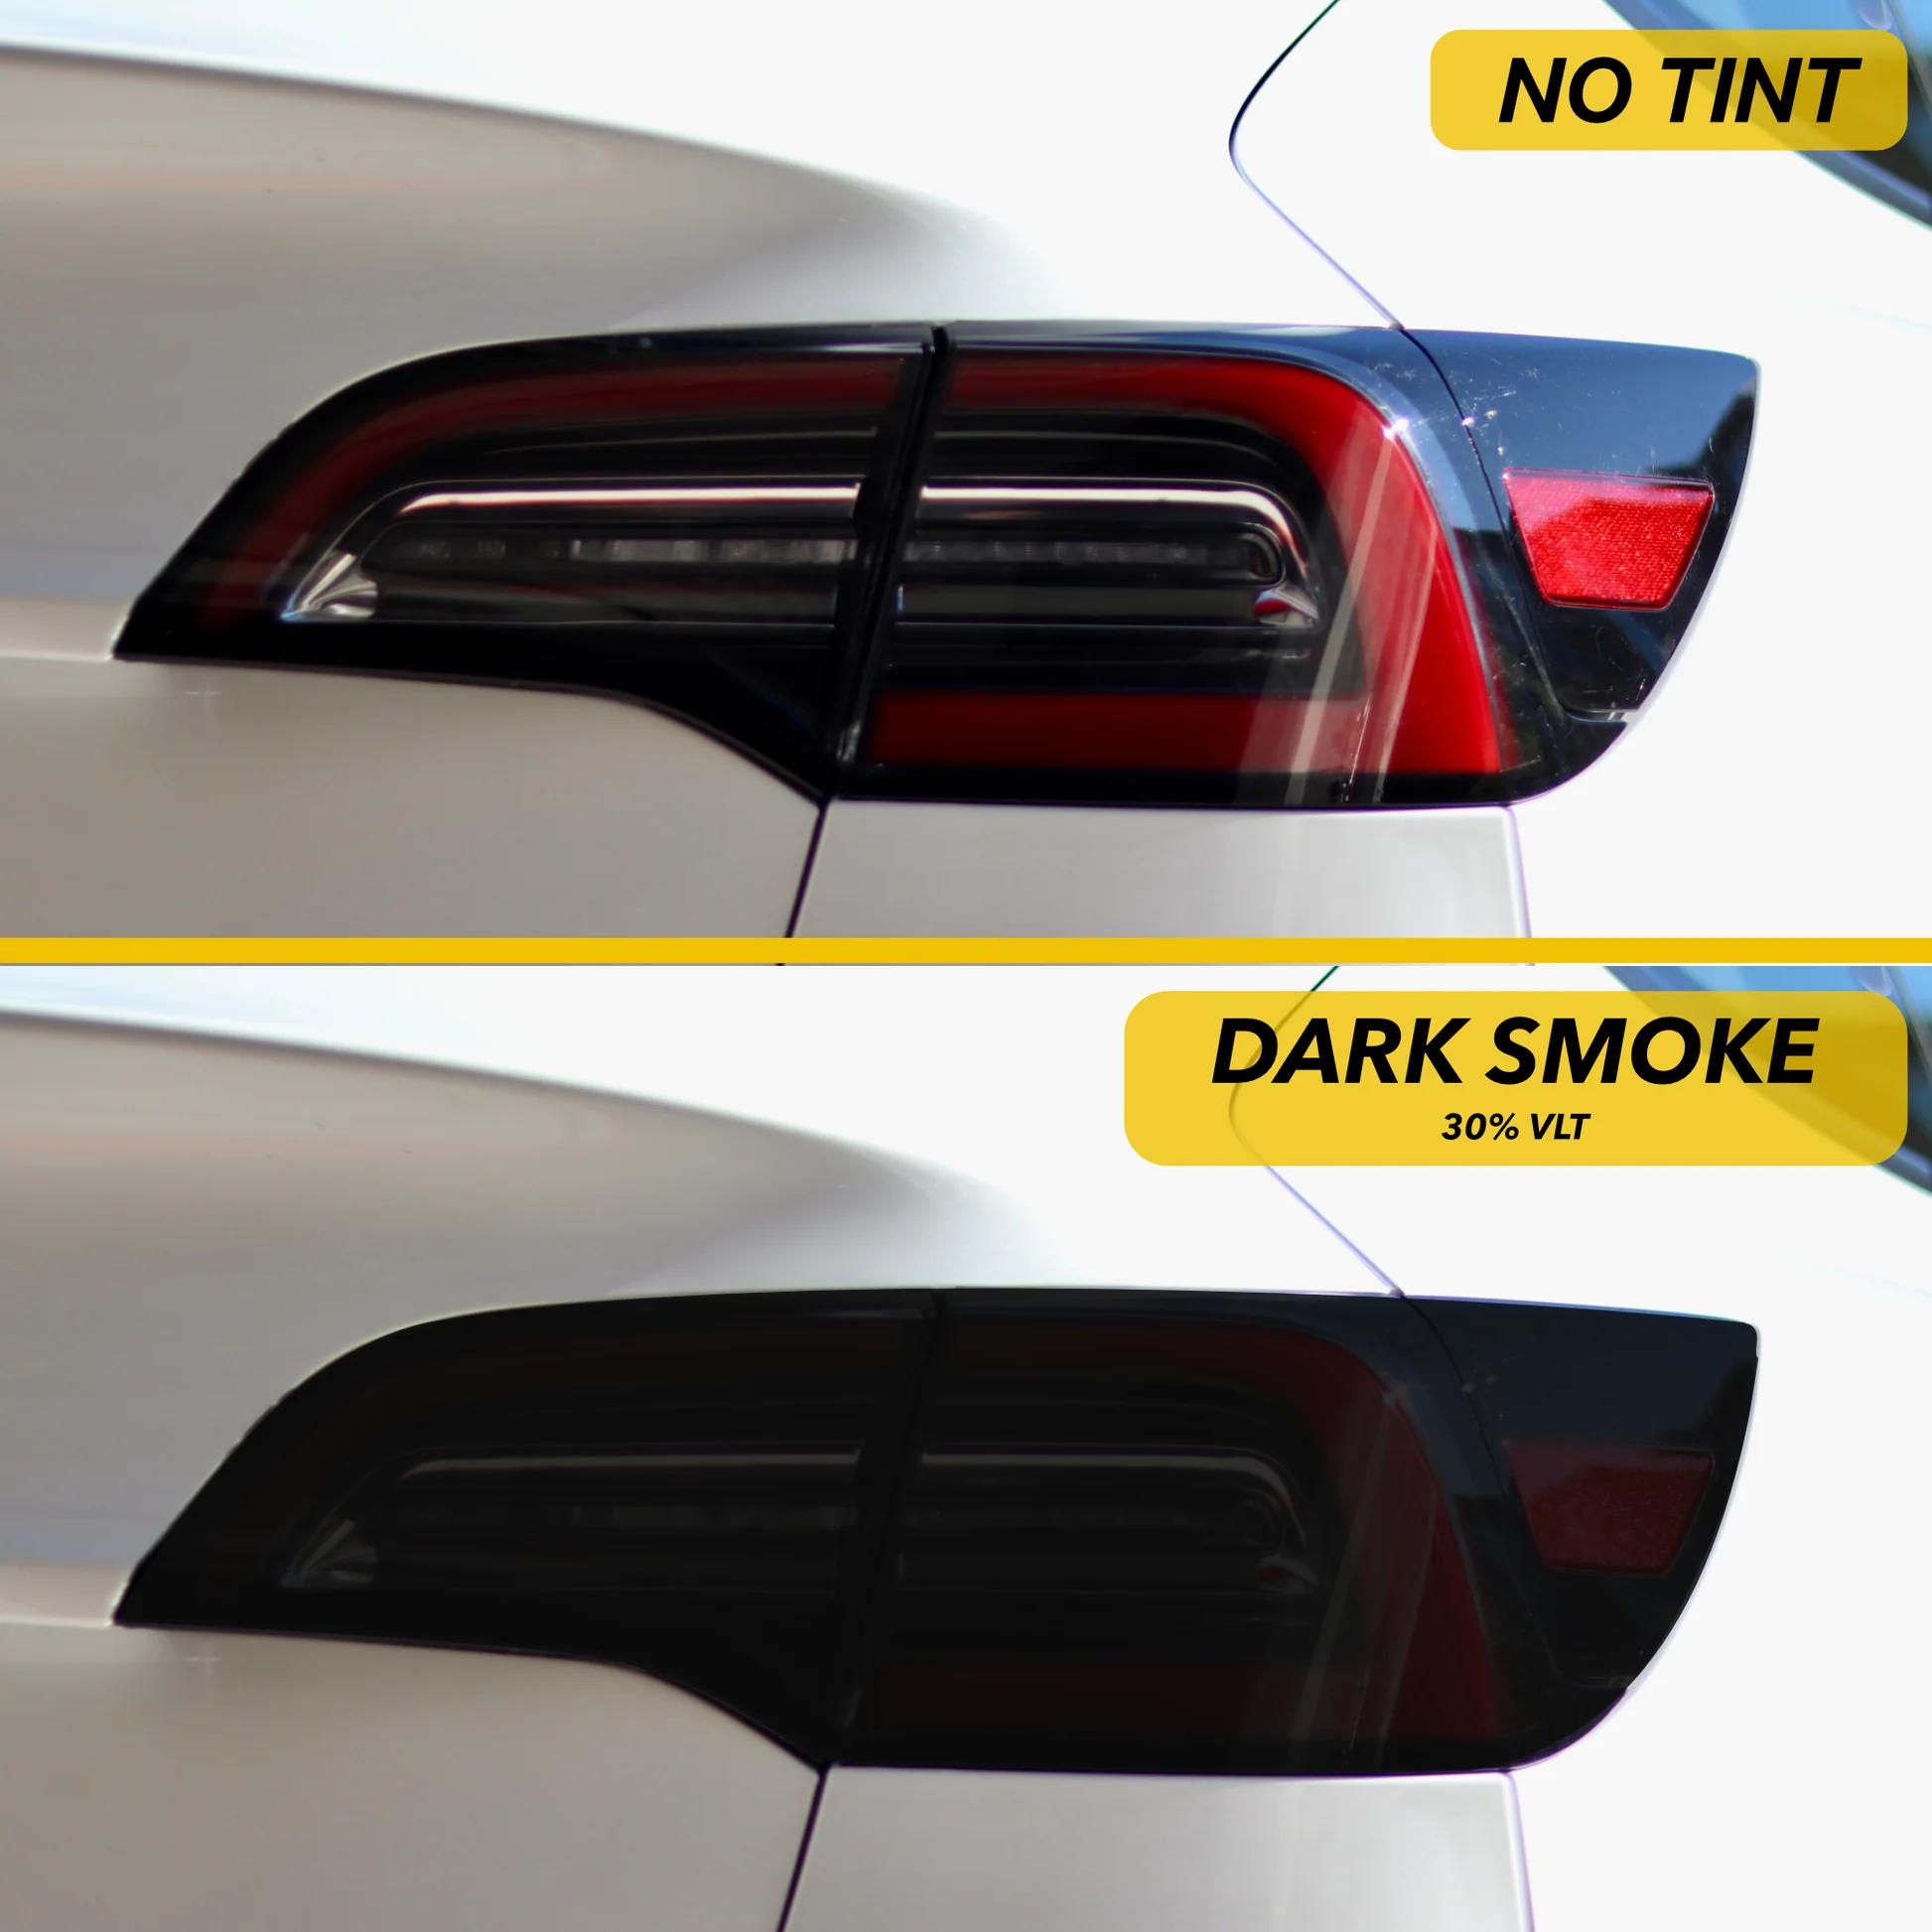 smoked lights for cars - Can you buy tinted tail lights